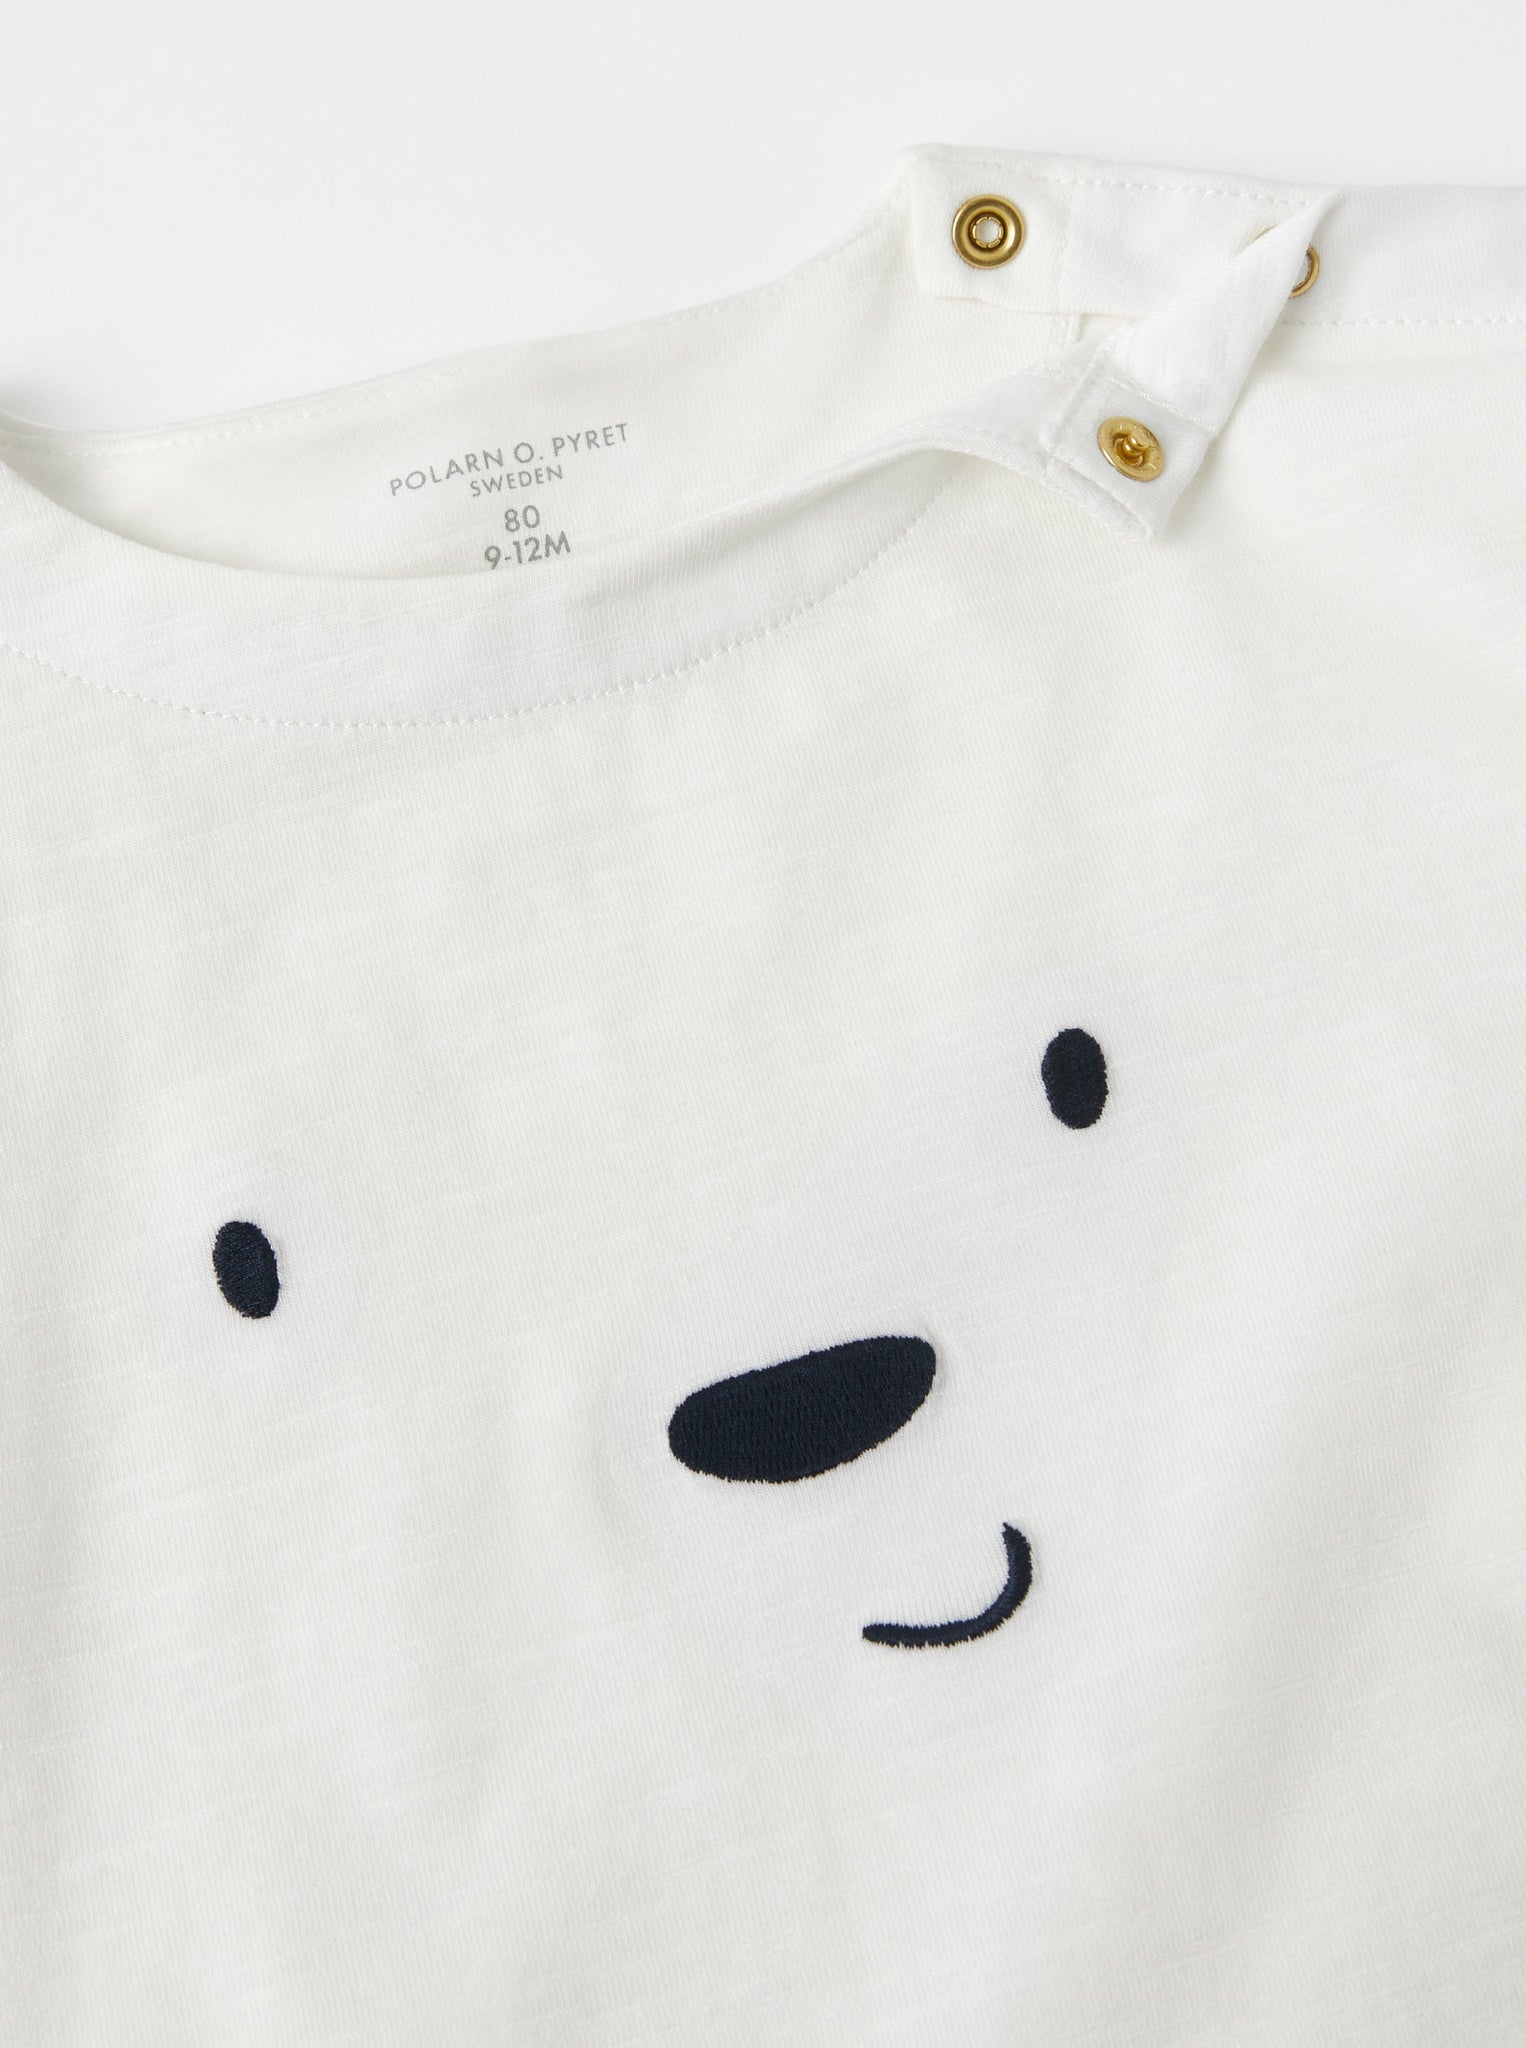 Organic Cotton White Baby Top from the Polarn O. Pyret babywear collection. Nordic kids clothes made from sustainable sources.